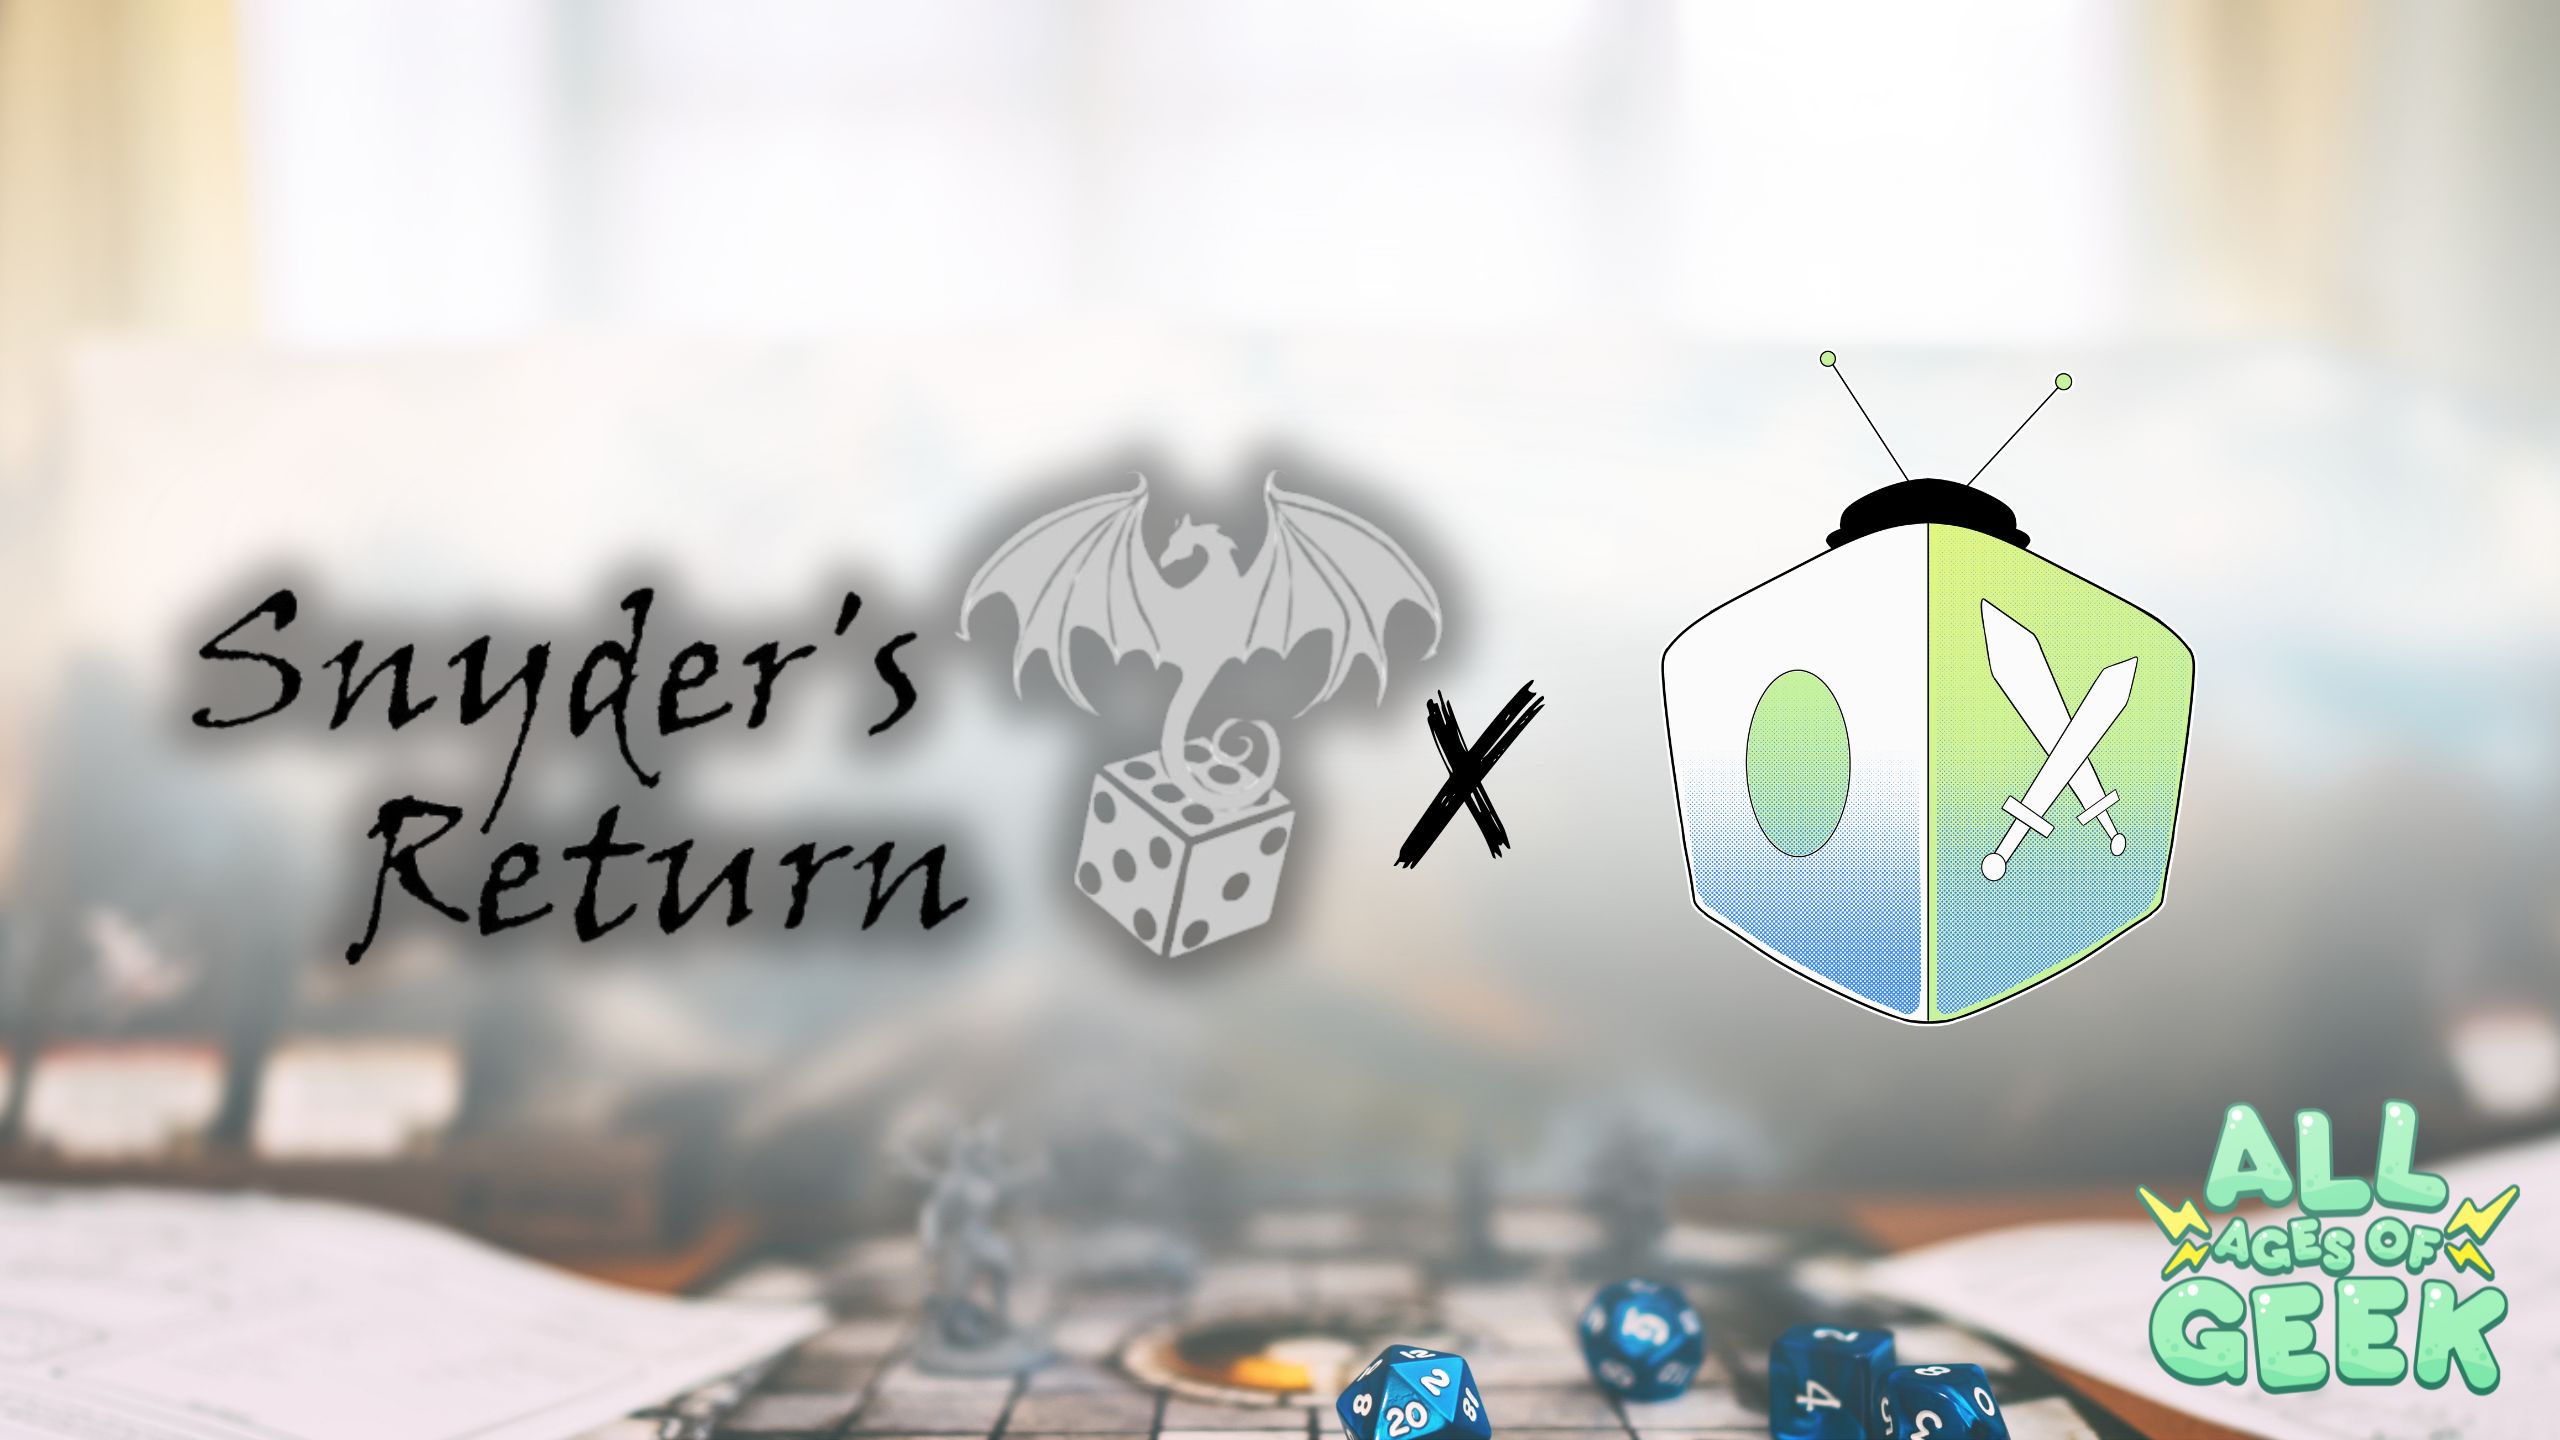 Logos of Snyder's Return and All Ages of Geek against a blurred background of a tabletop roleplaying game setup. The Snyder's Return logo features a dragon perched on a dice, while the All Ages of Geek logo includes a stylized die with swords and an antenna. The two logos are separated by an "X" to indicate collaboration.